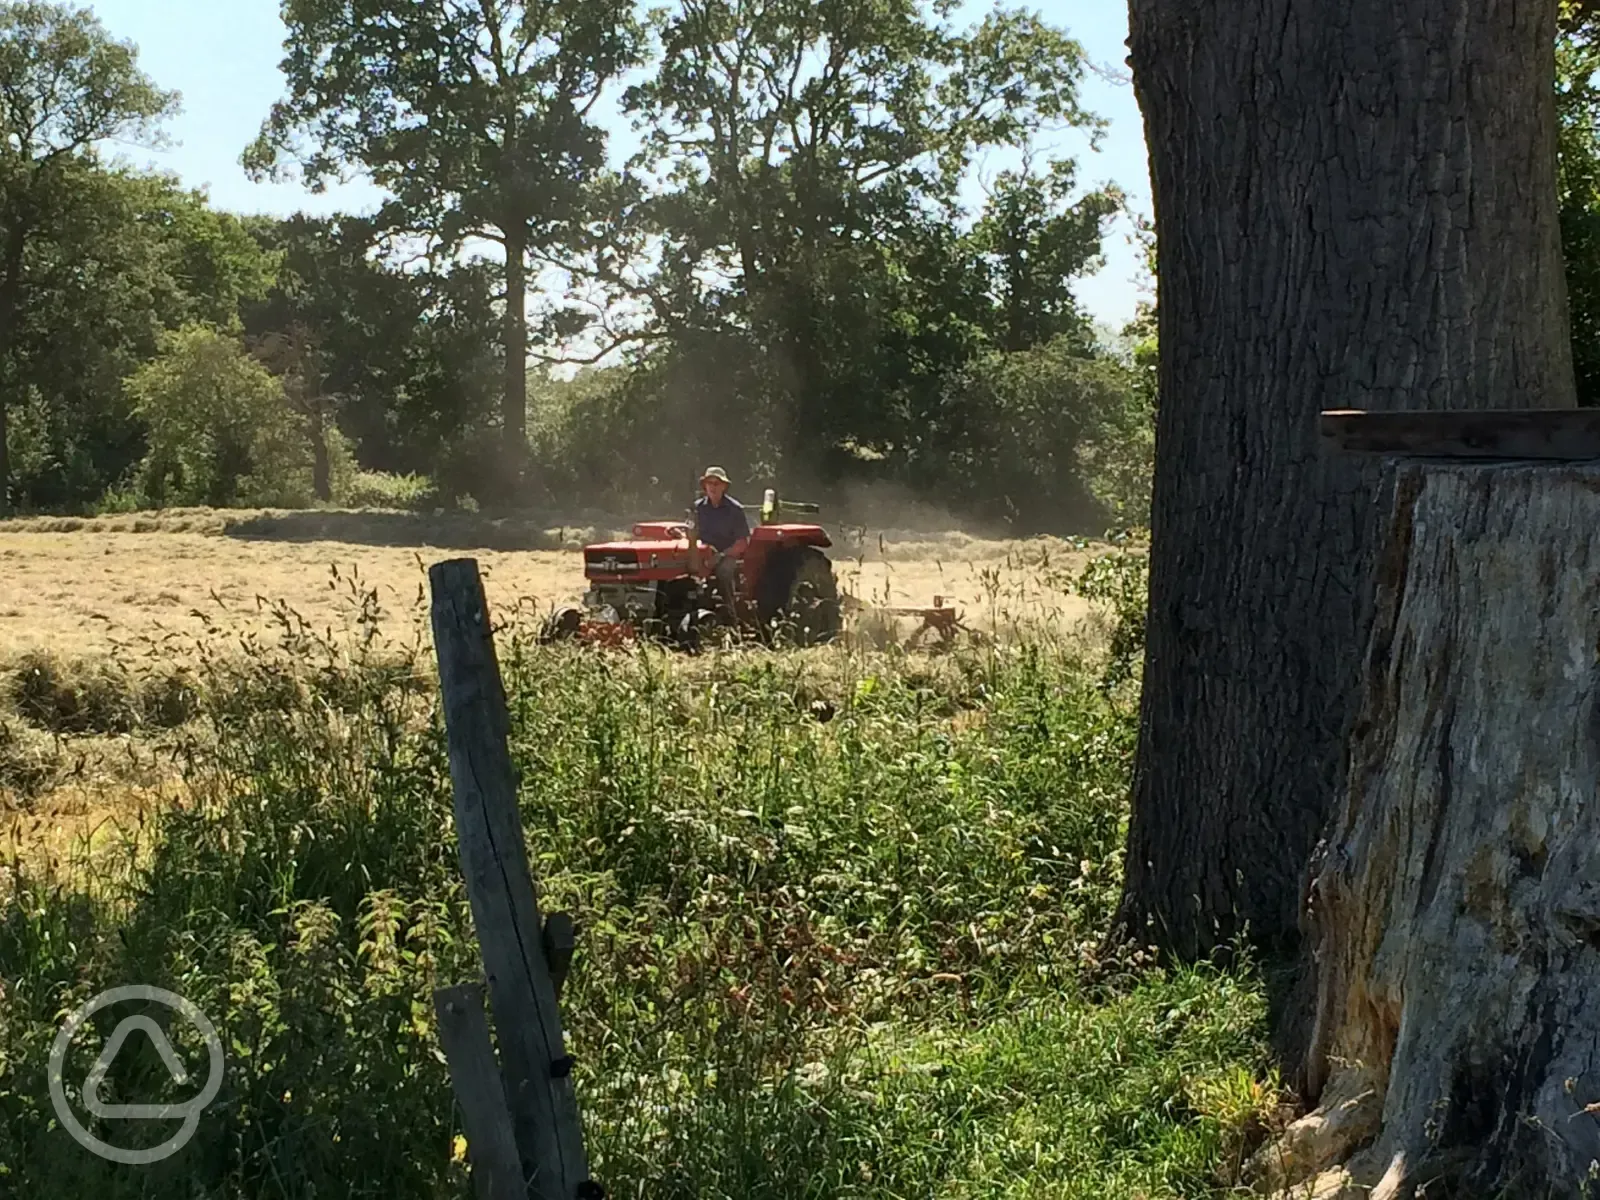 Haymaking with the little red tractor